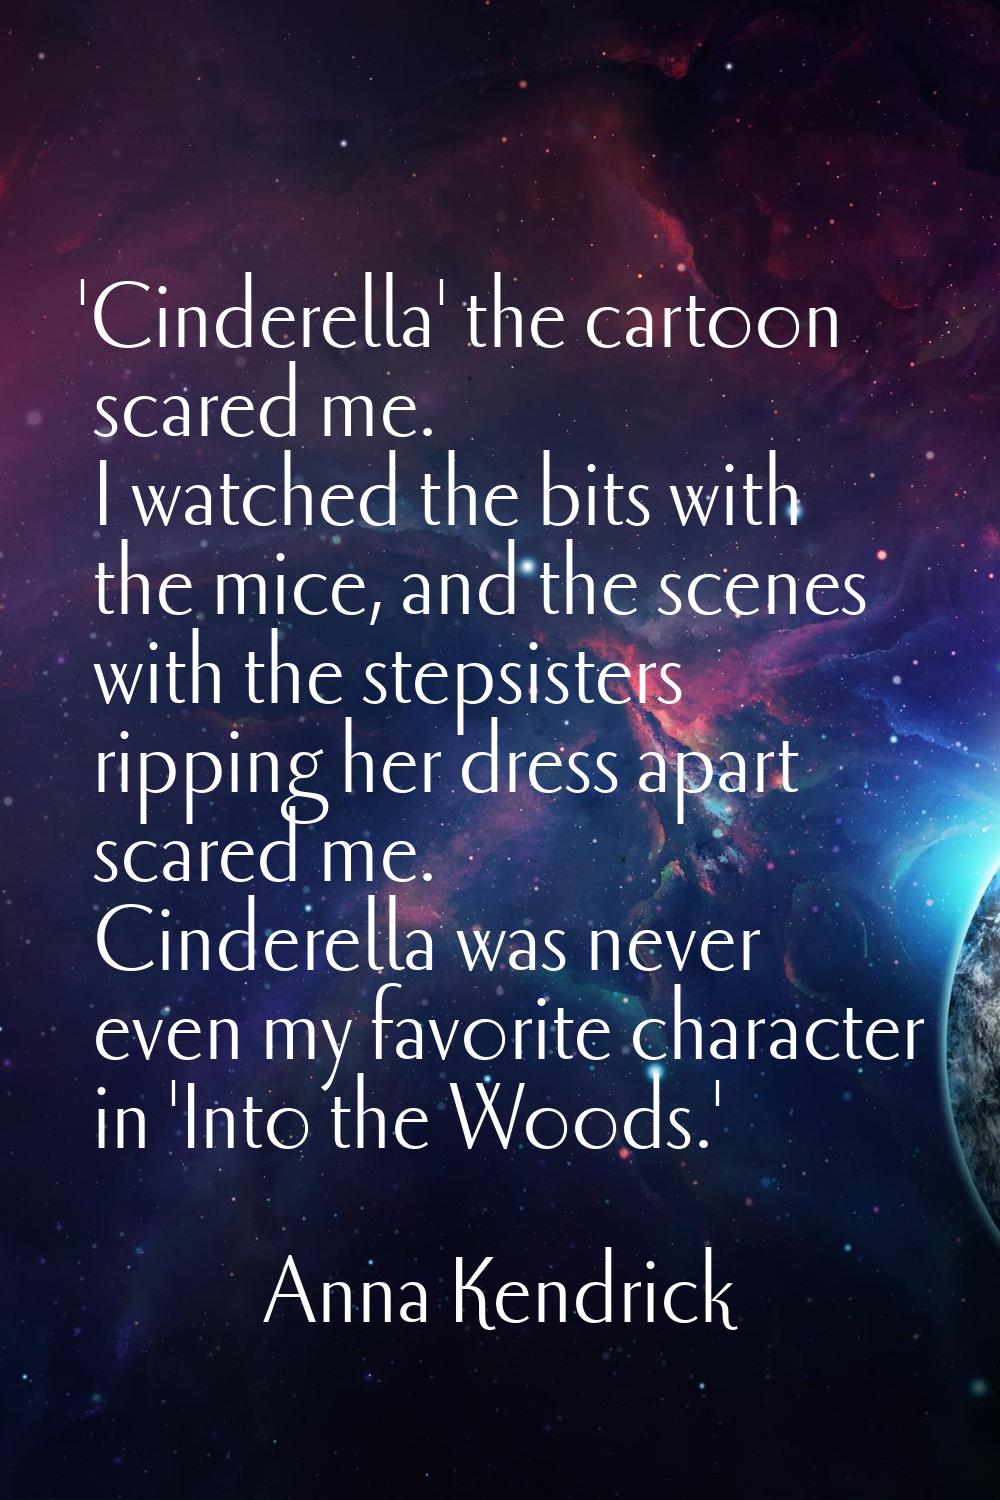 'Cinderella' the cartoon scared me. I watched the bits with the mice, and the scenes with the steps